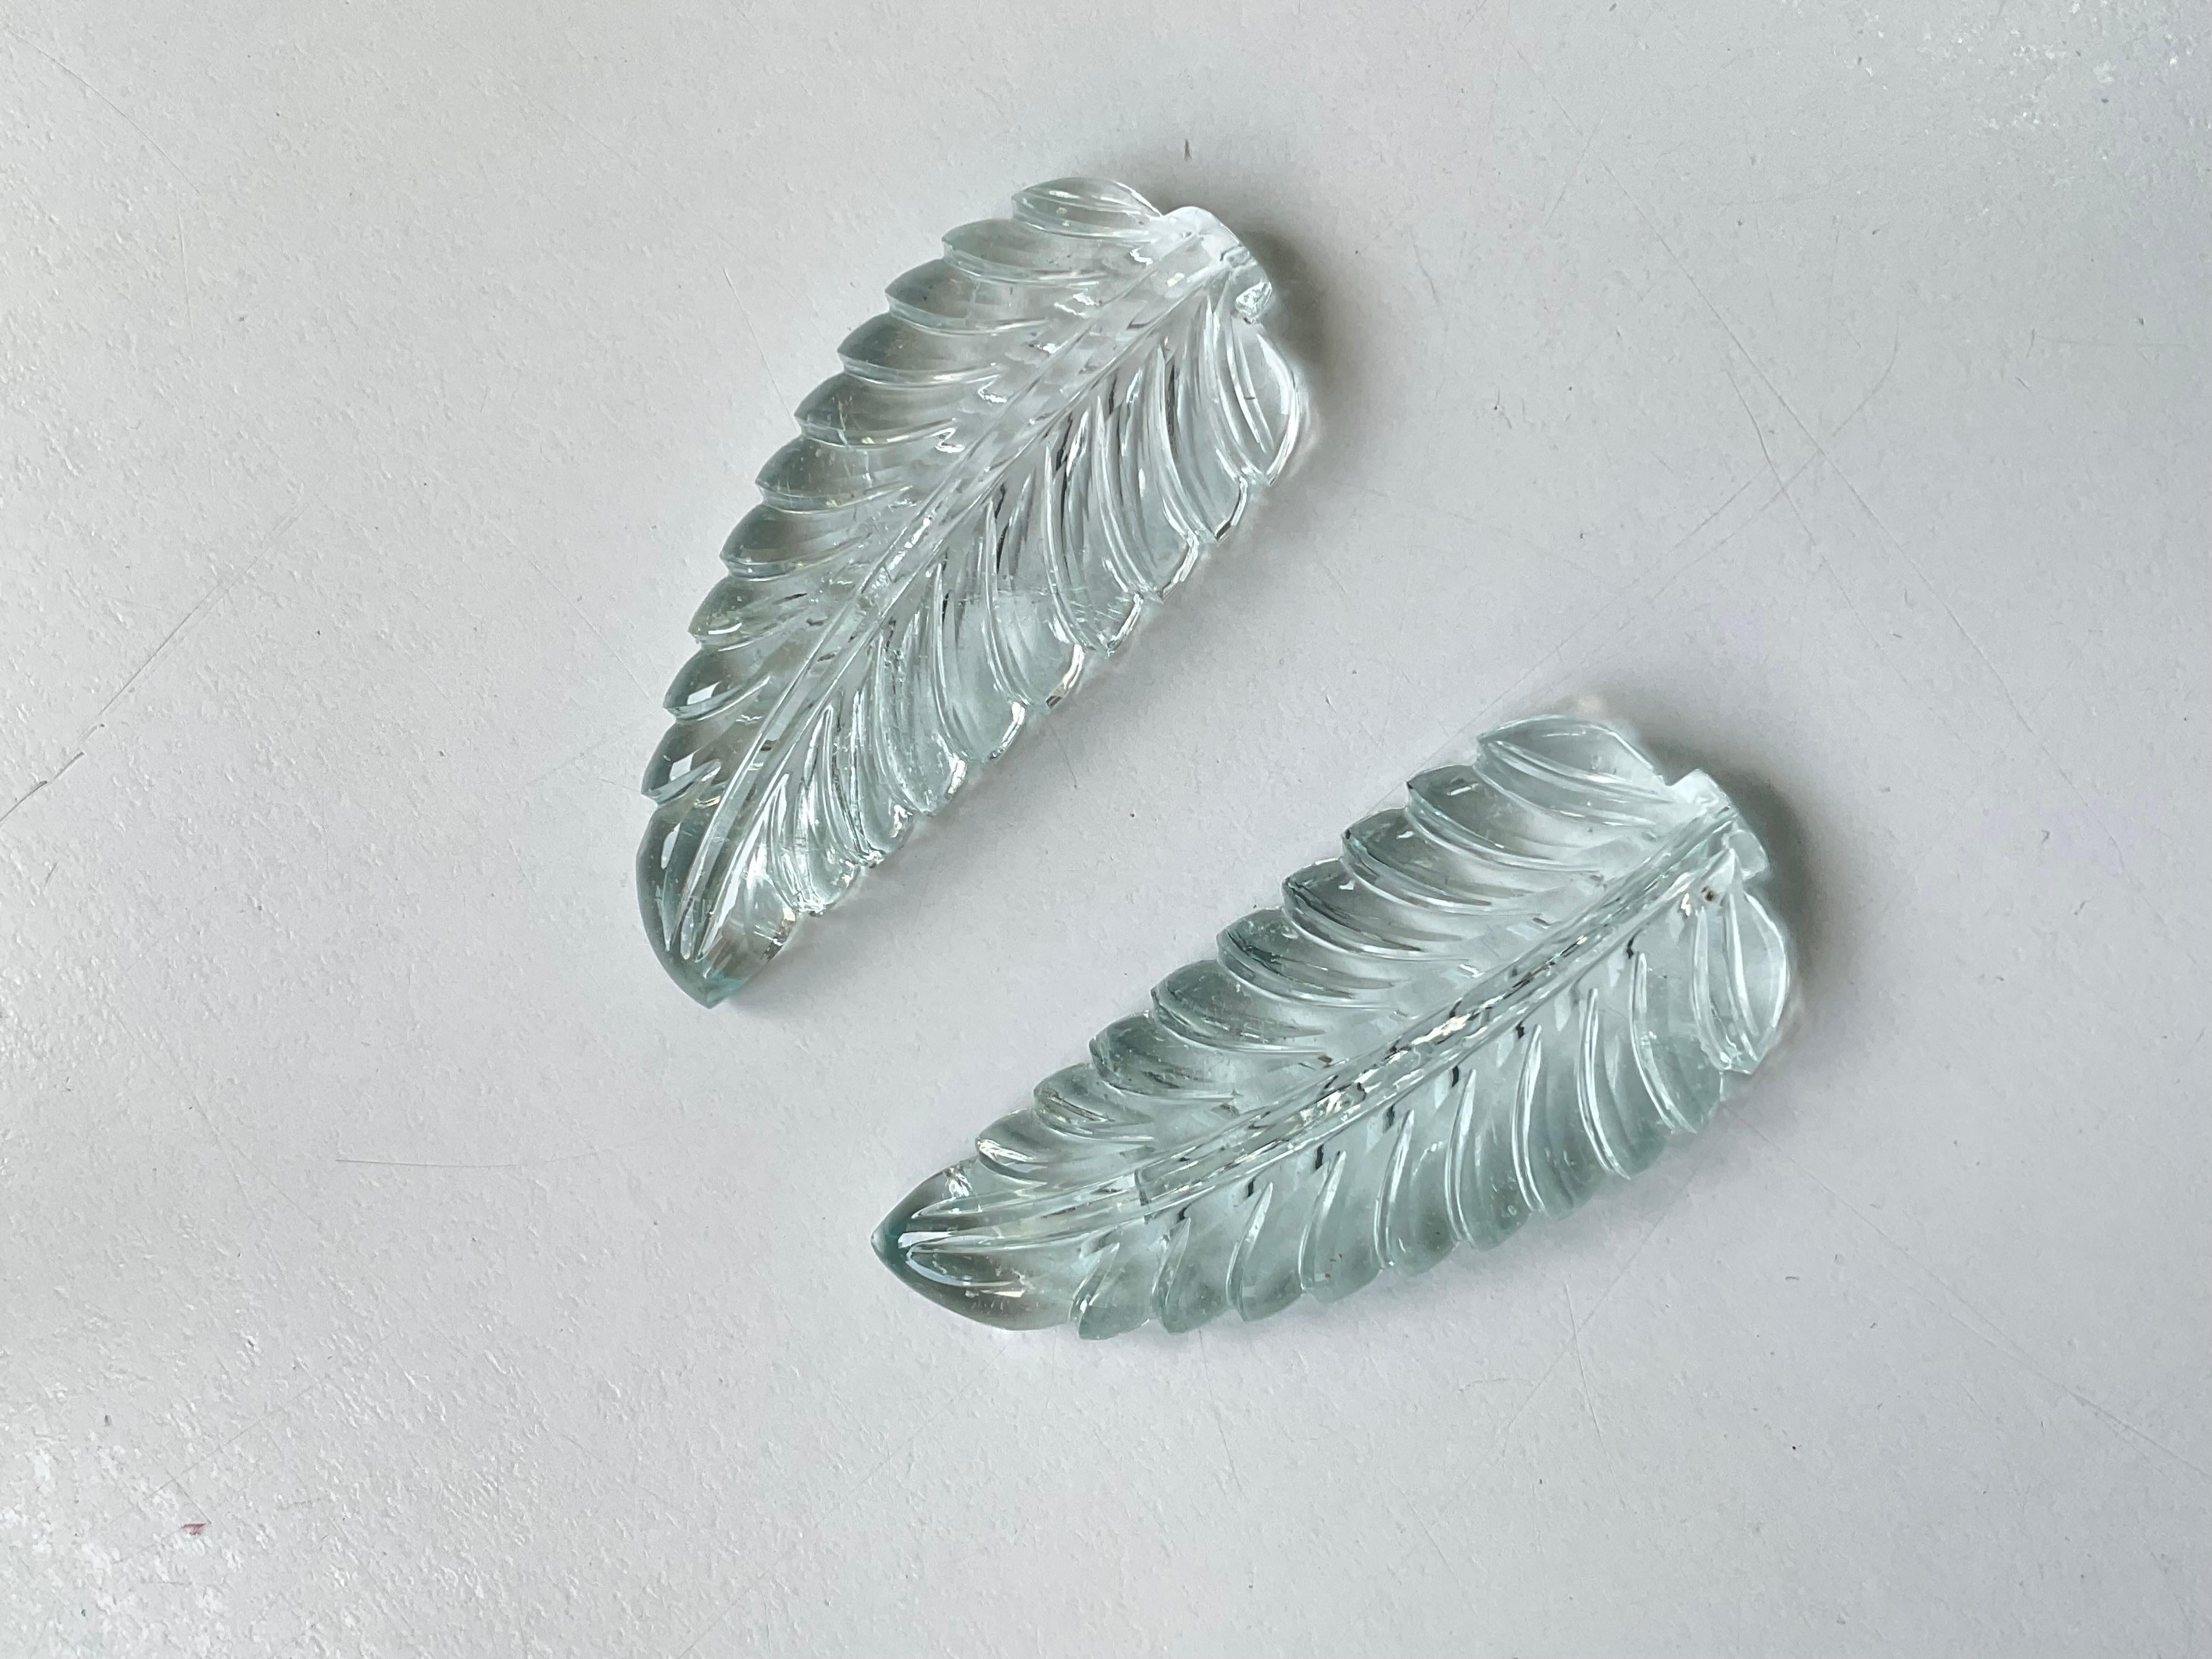 Cabochon Natural Aquamarine Carved Leaf Loose Gemstone Rare Size and Hand Carving For Sale